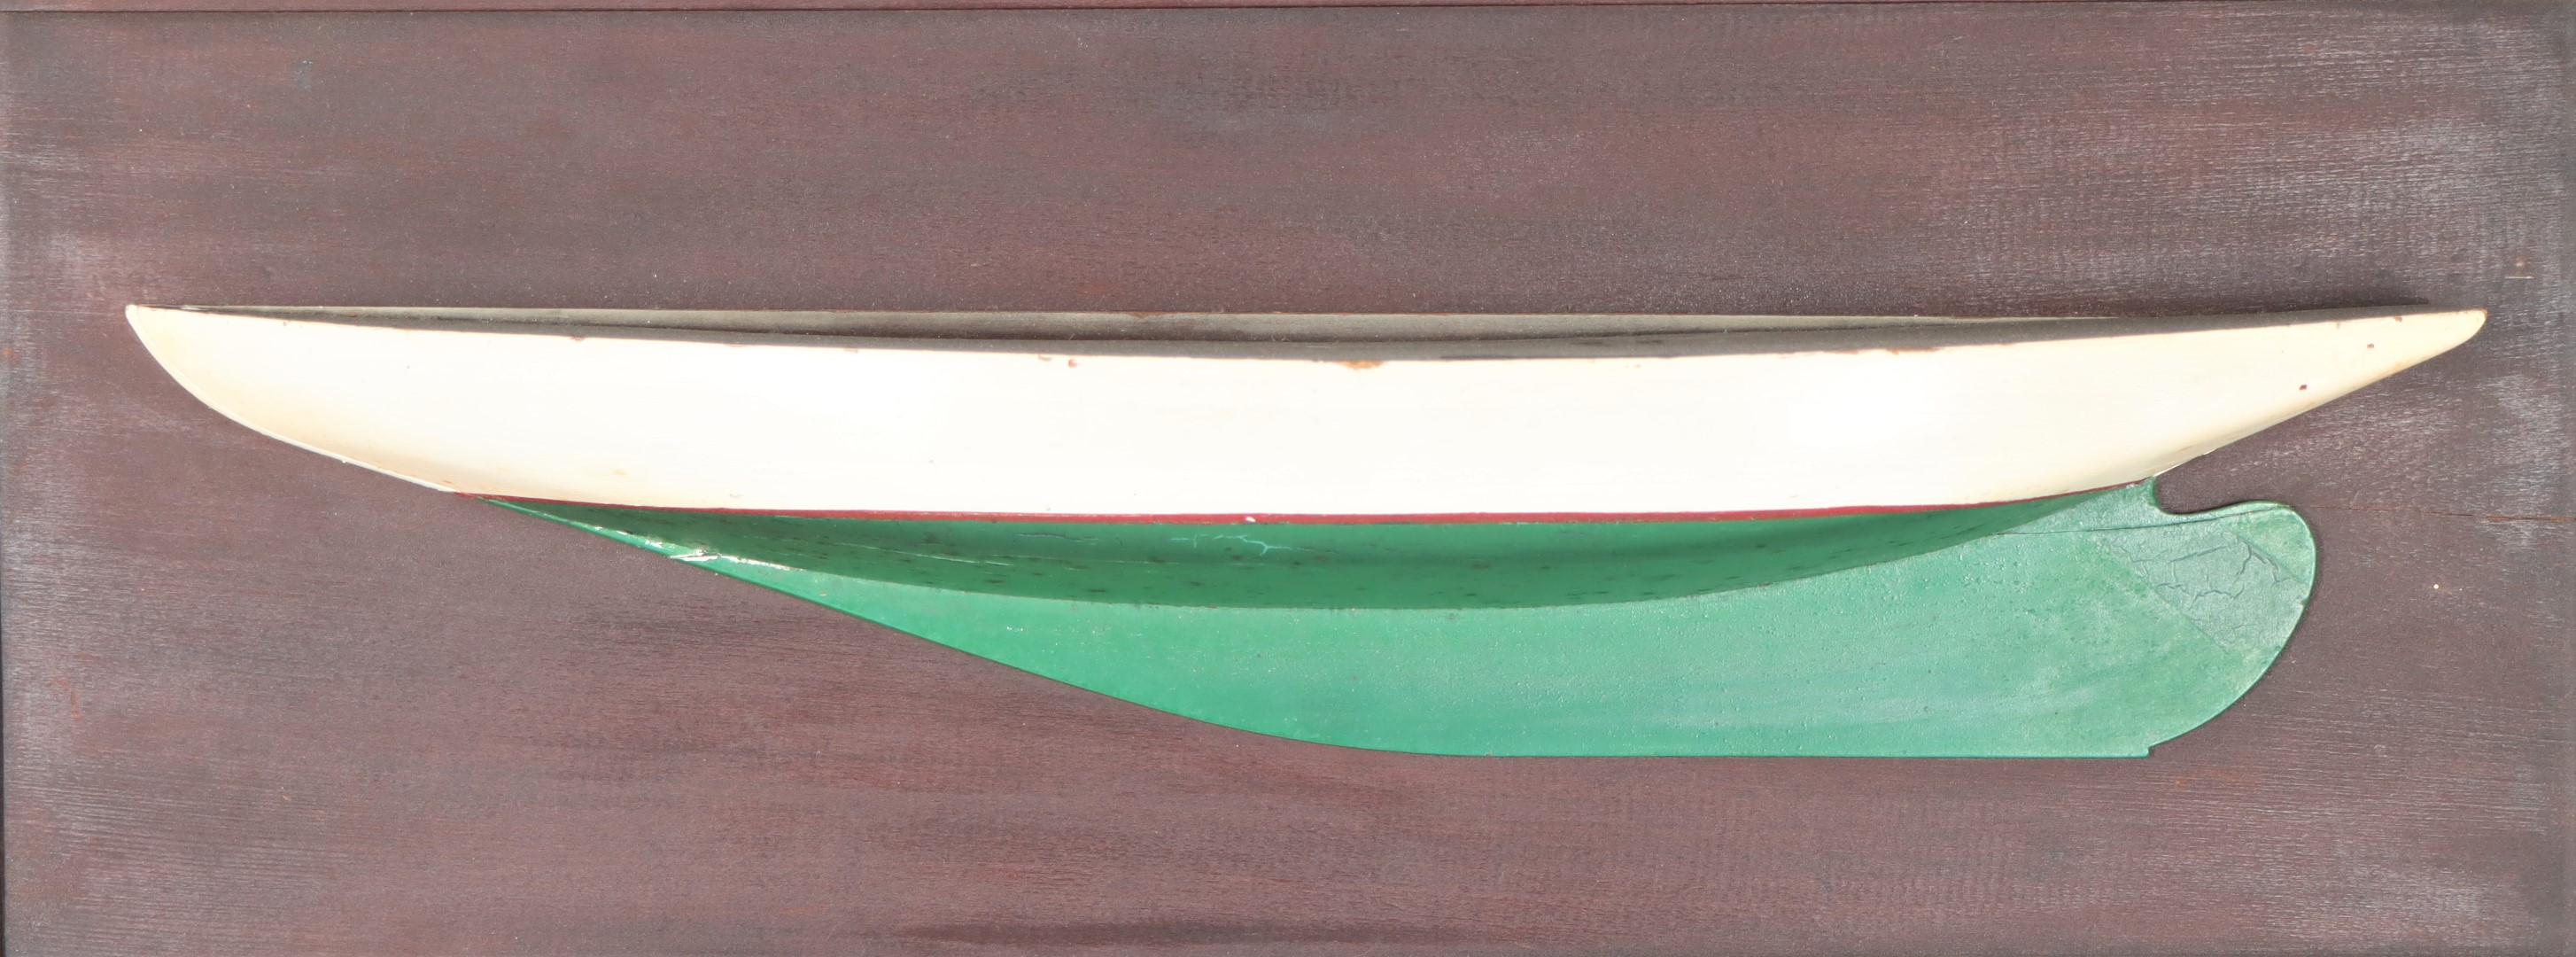 Mounted Wooden Half Boat Hull - Image 4 of 6